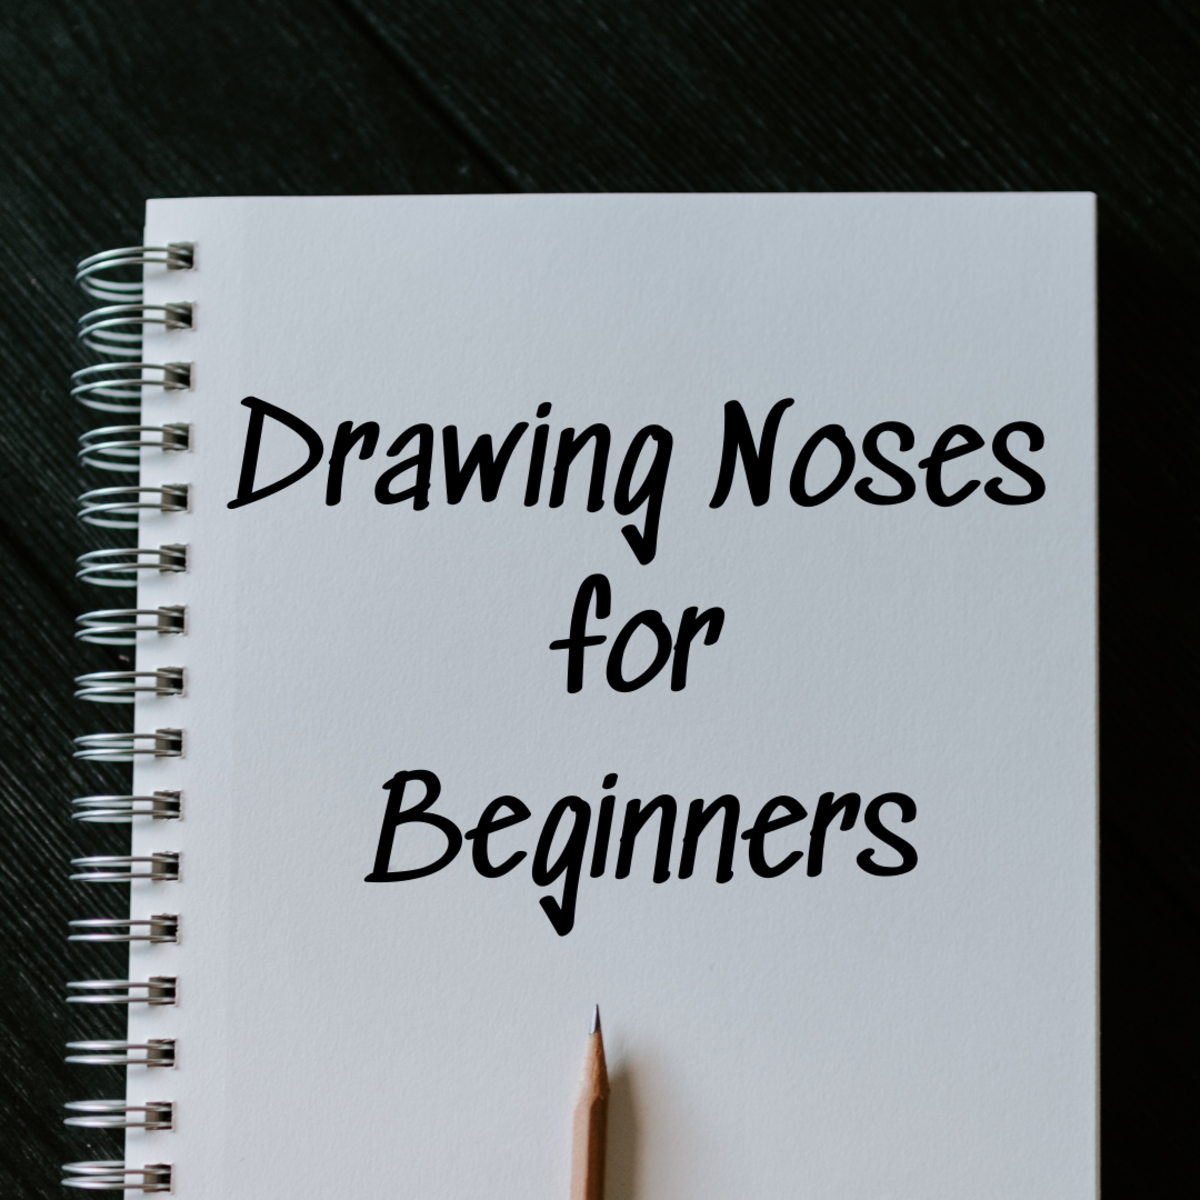 Learn how to draw a realistic nose with this easy-to-follow, step-by-step guide